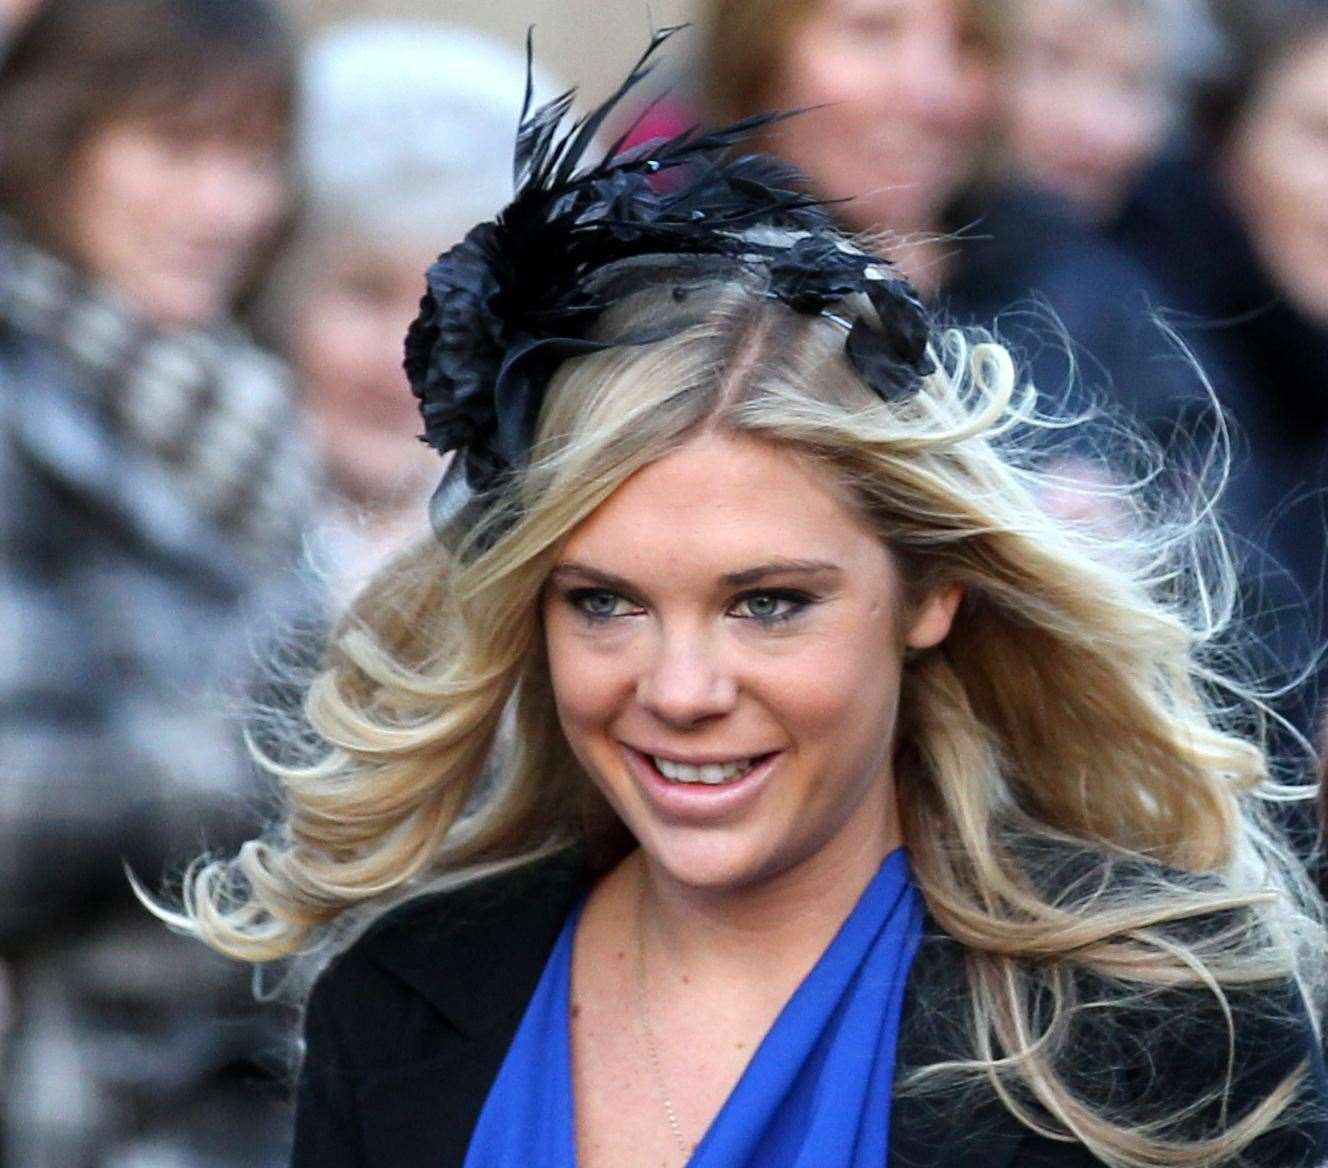 Harry described the impact of press intrusion on his former relationship with Chelsy Davy (Andrew Milligan/PA)